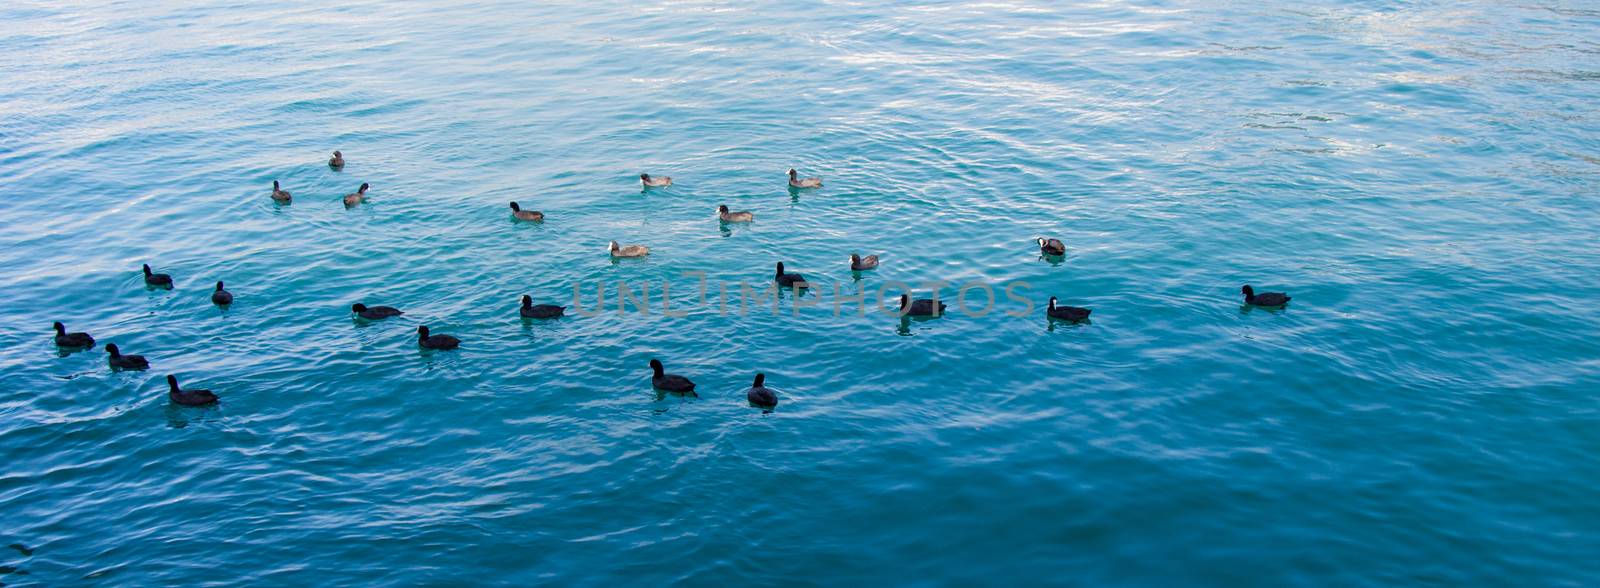 Flock of birds on water with water background by berkay